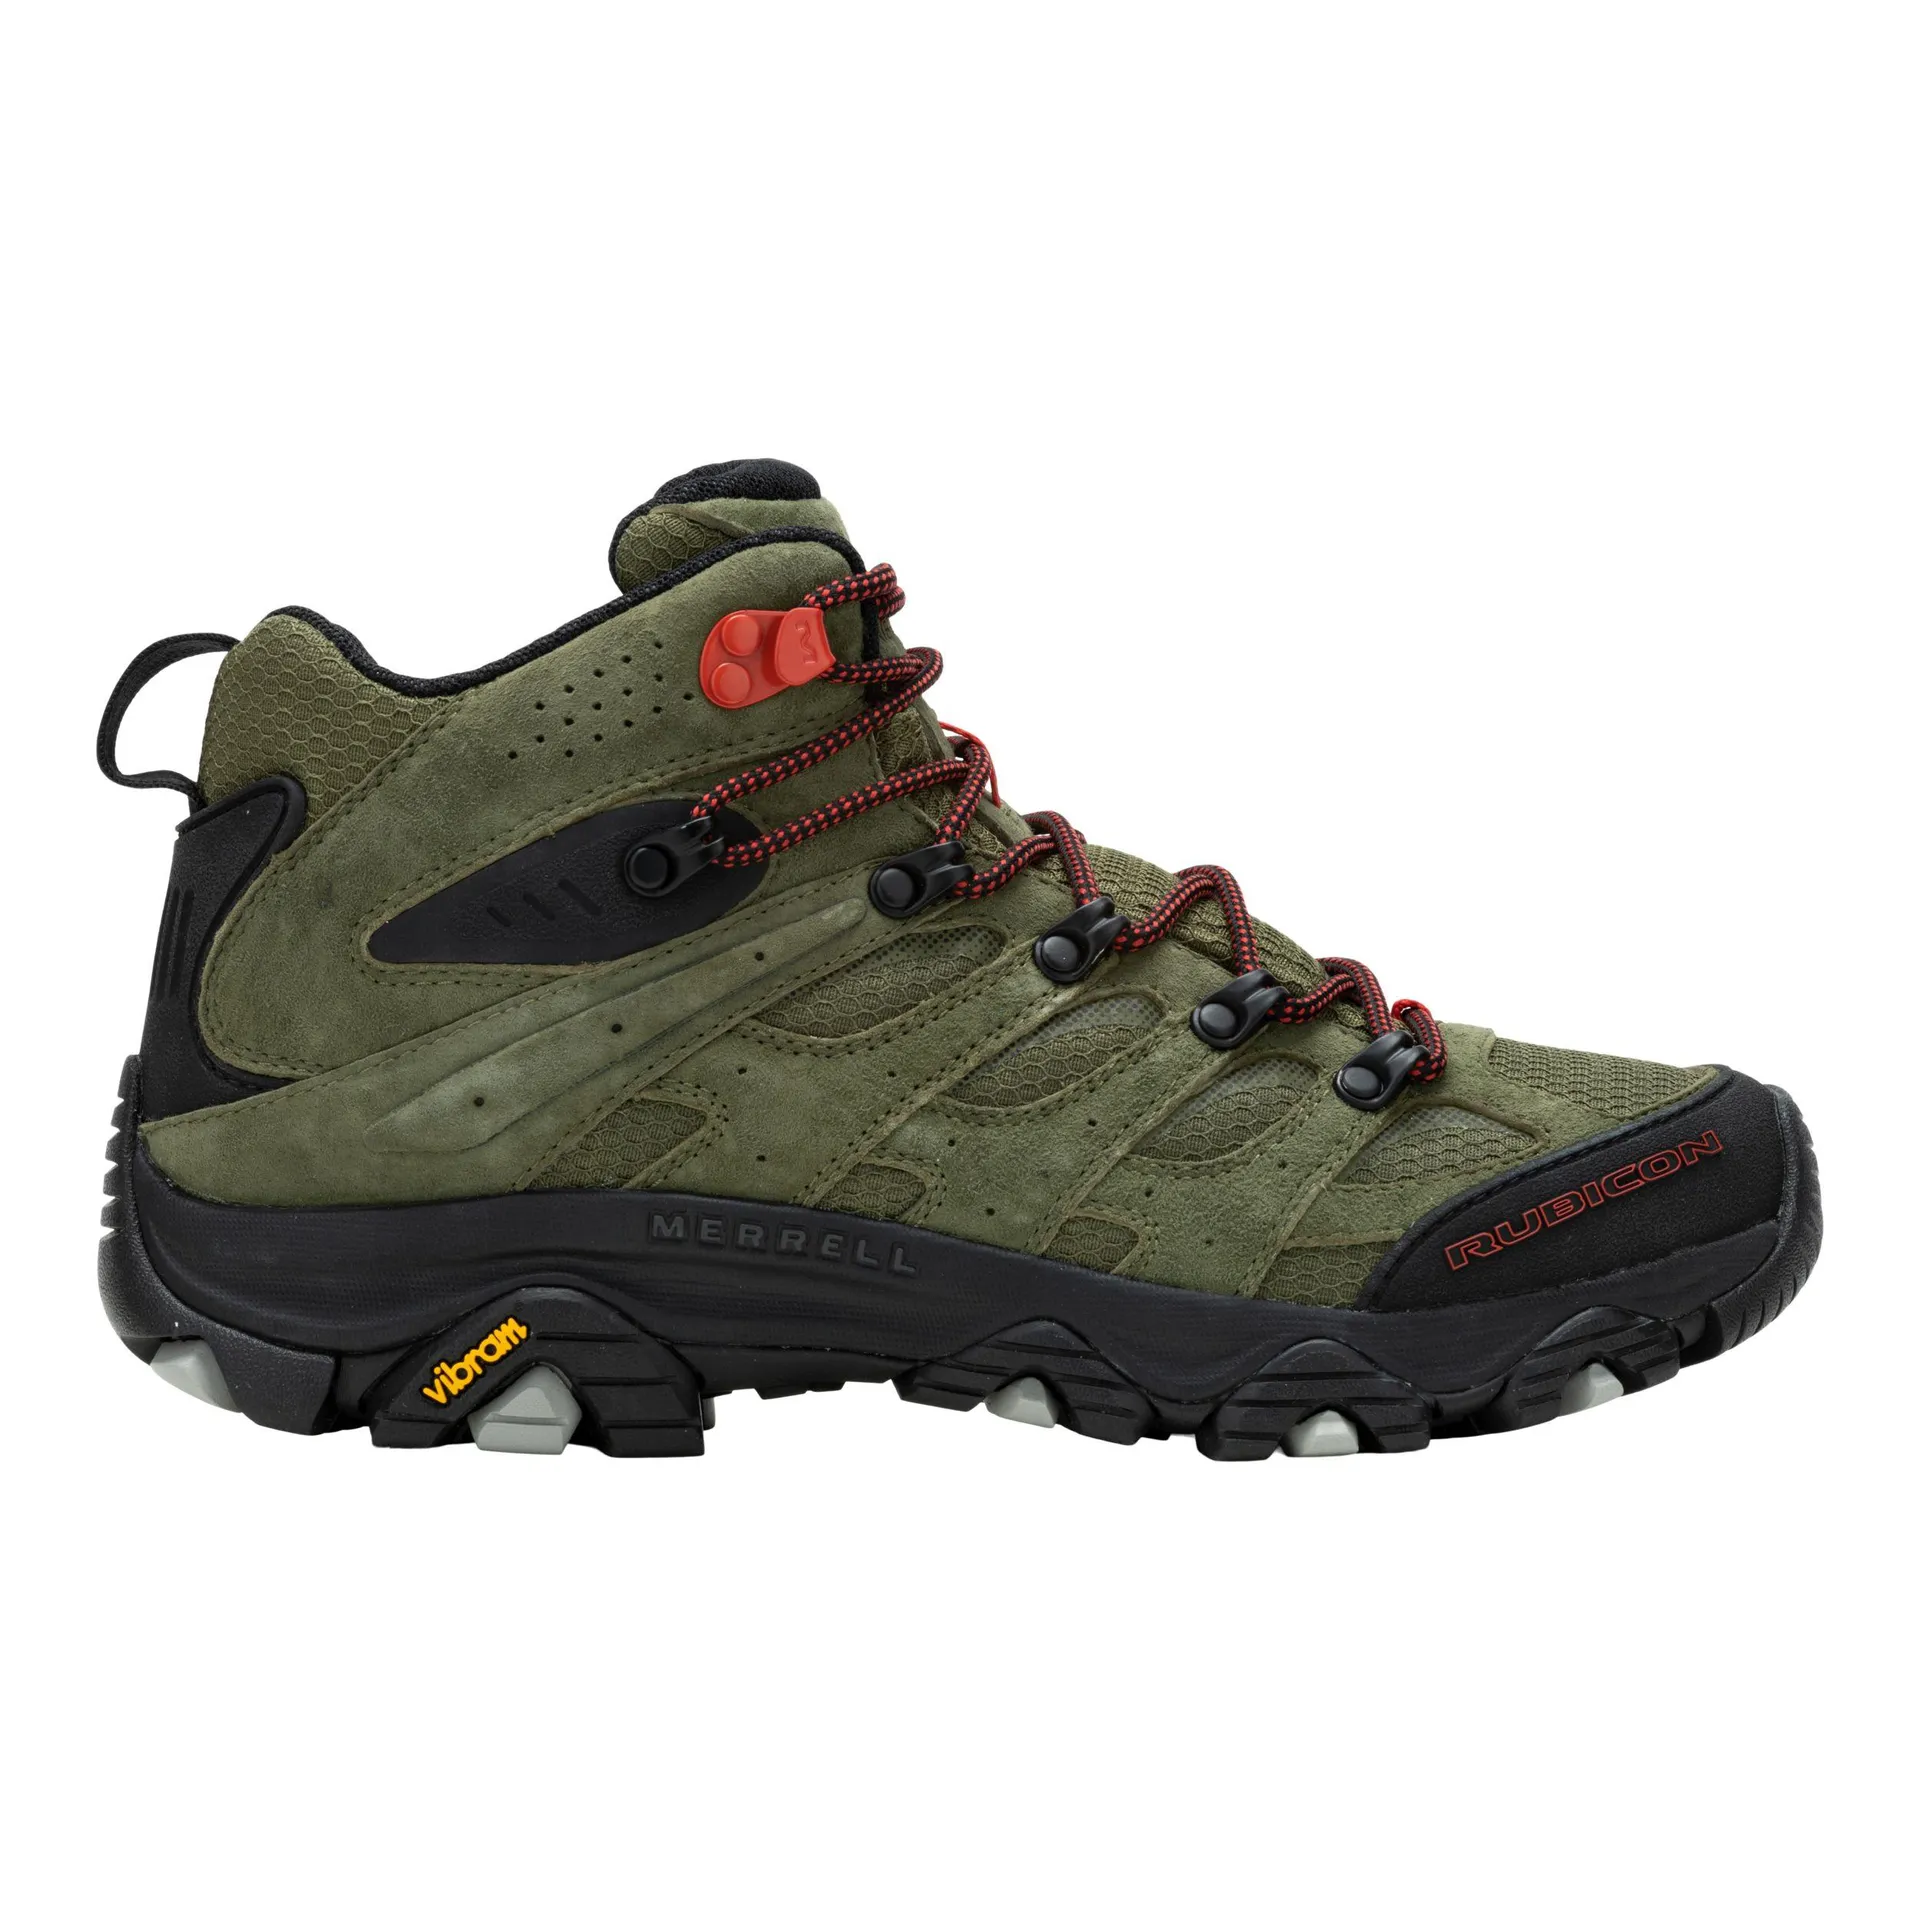 Merrell X Jeep Men's MOAB 3 Mid Waterproof Leather Hiking Shoes